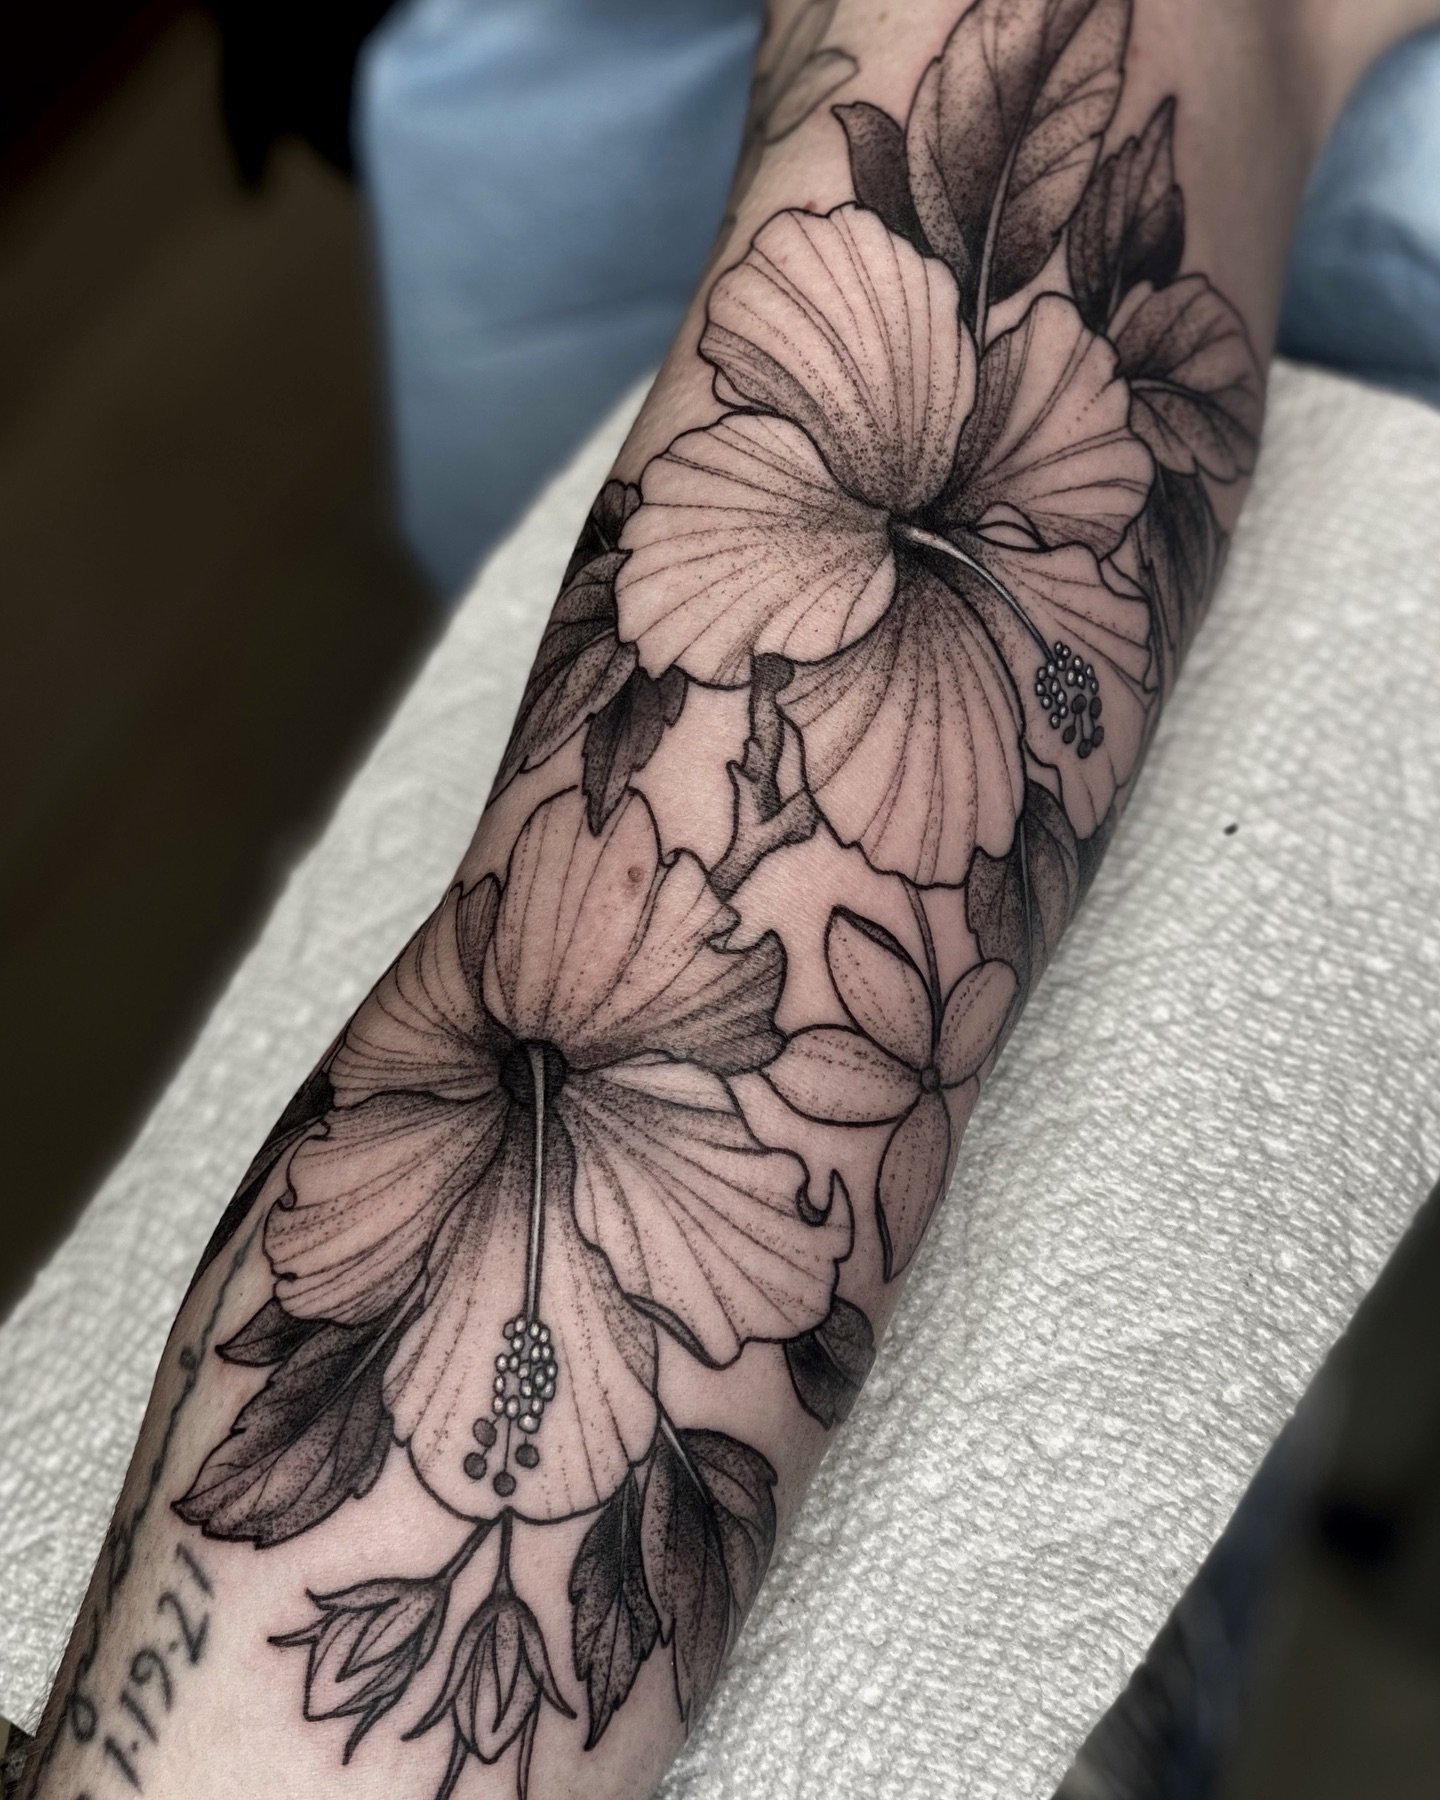 Some Hibiscus to add to my lovely client&rsquo;s tropical blackwork sleeve. Thanks for the trust, dedication and sitting like a rock🌺🌺.
.
.
.
#newyorktattoo#newyorktattooartist#nytattoo#nytattooer#newyorktattooer#botanicaltattoo#botanicaltattooer#b